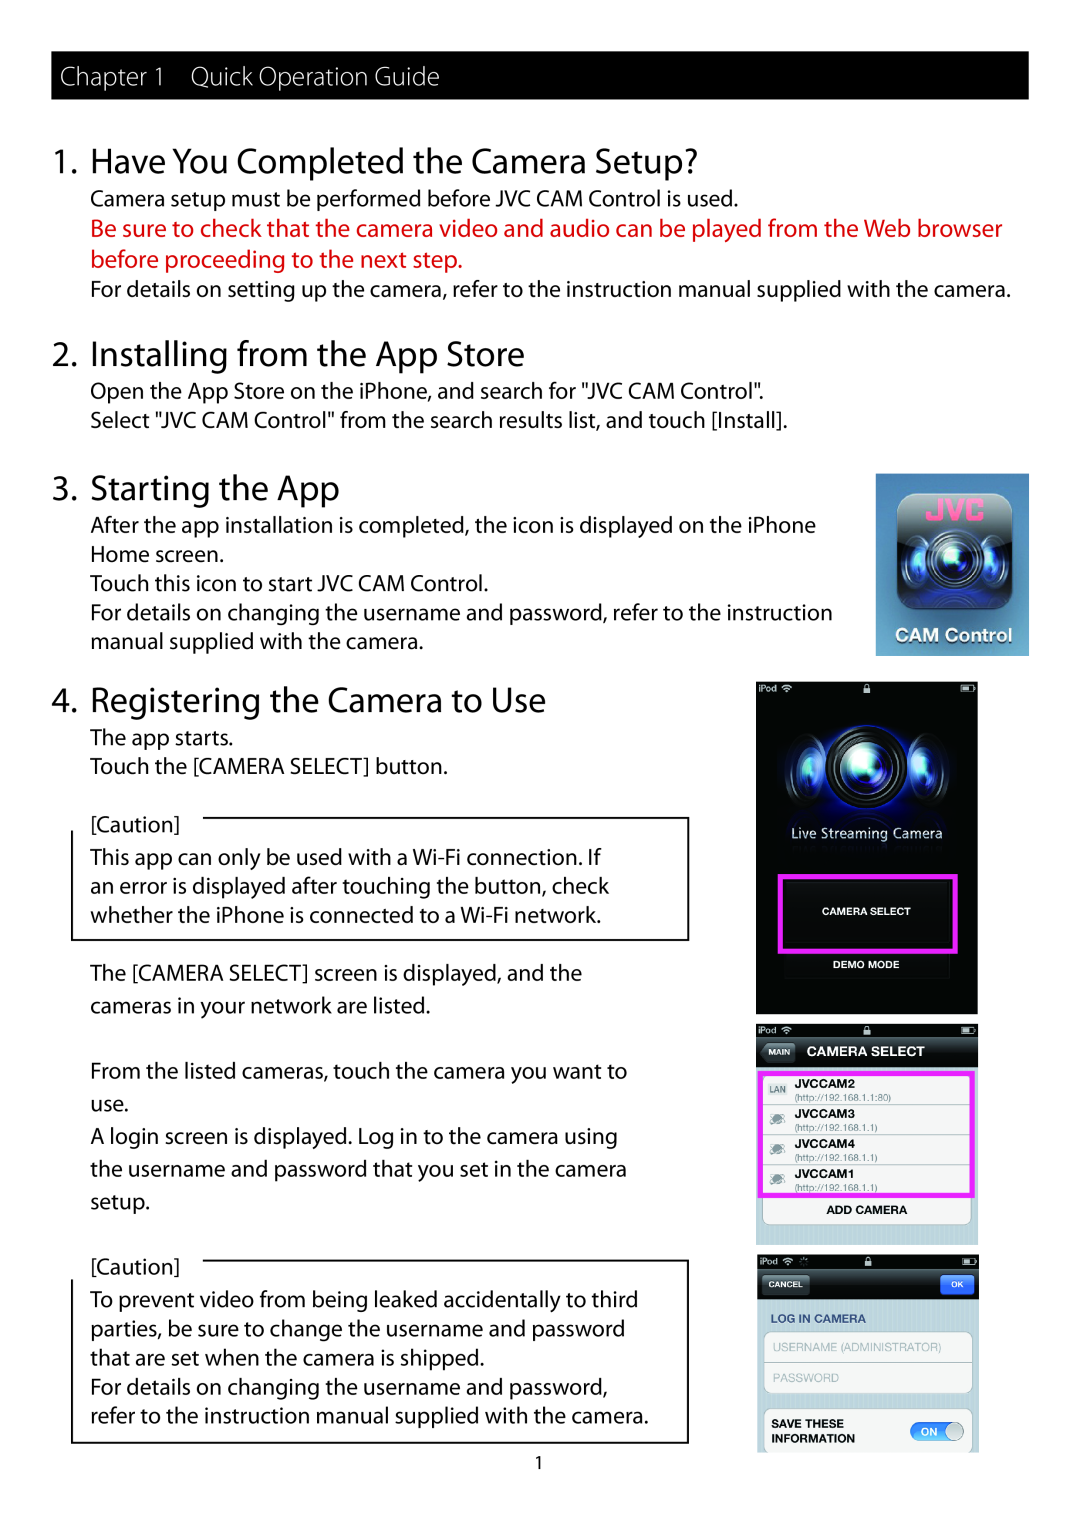 JVC GV-LS2 Have You Completed the Camera Setup?, Installing from the App Store, Starting the App, Quick Operation Guide 